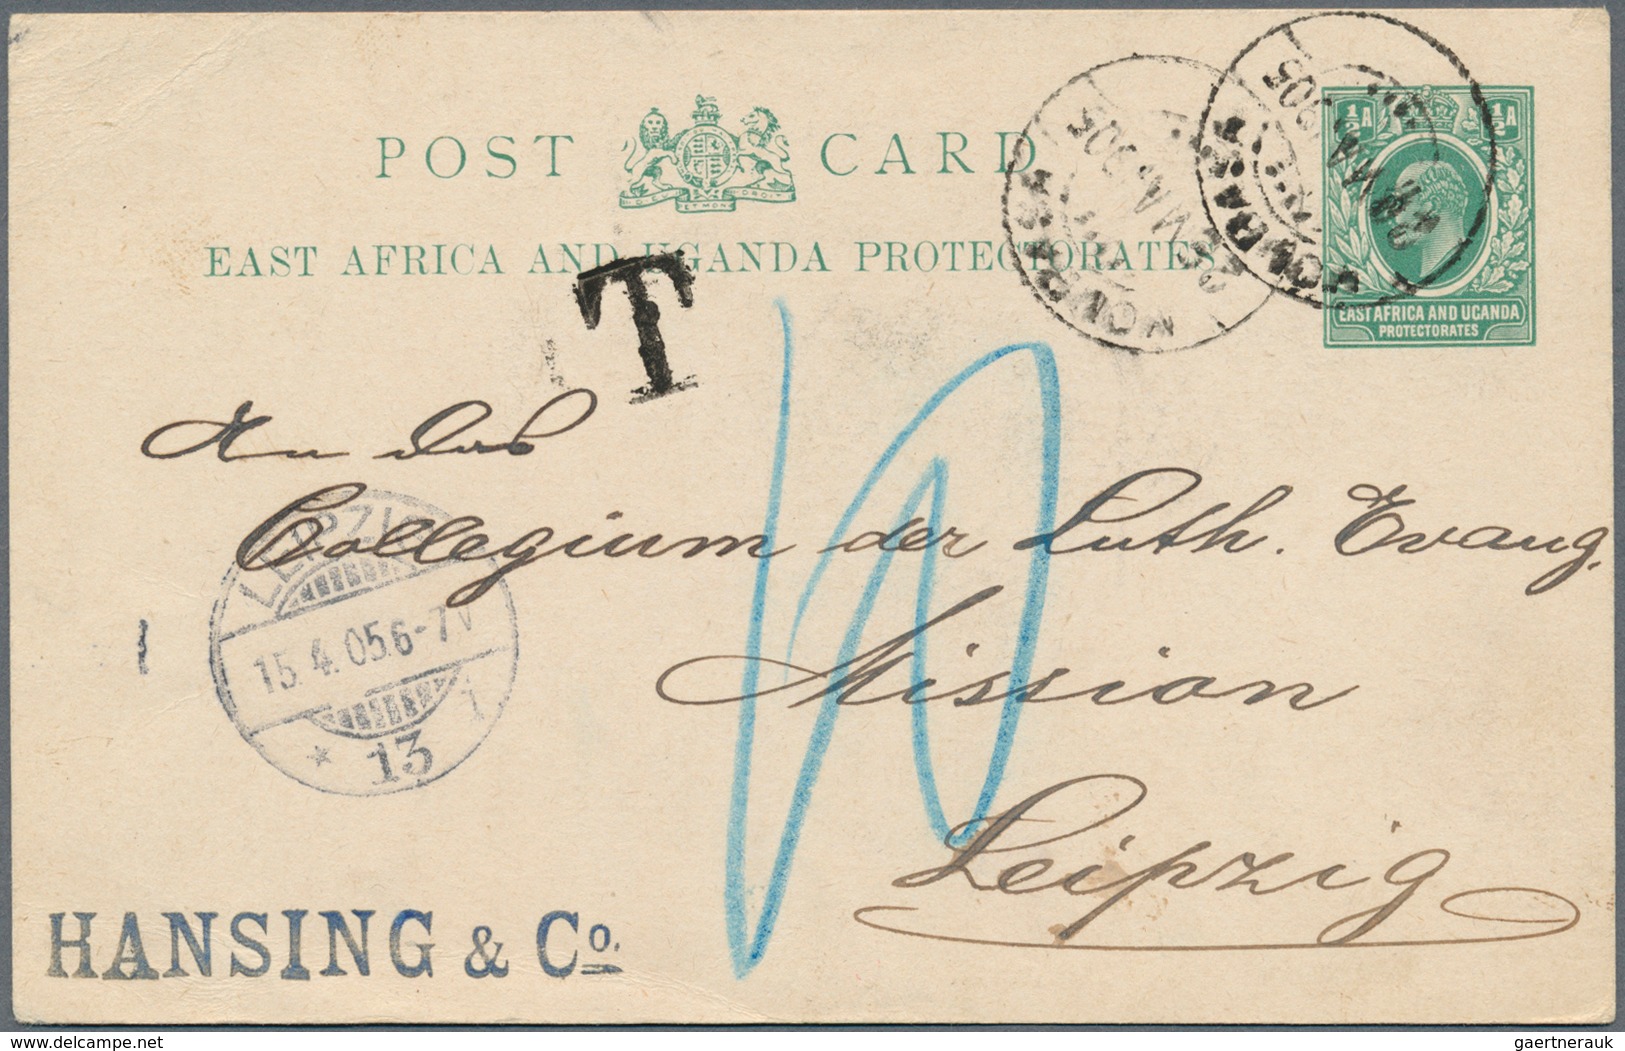 Asien: 1872/1972 (ca.), exc. 70 covers, postcards and postal staionery items, mostly from Asian coun